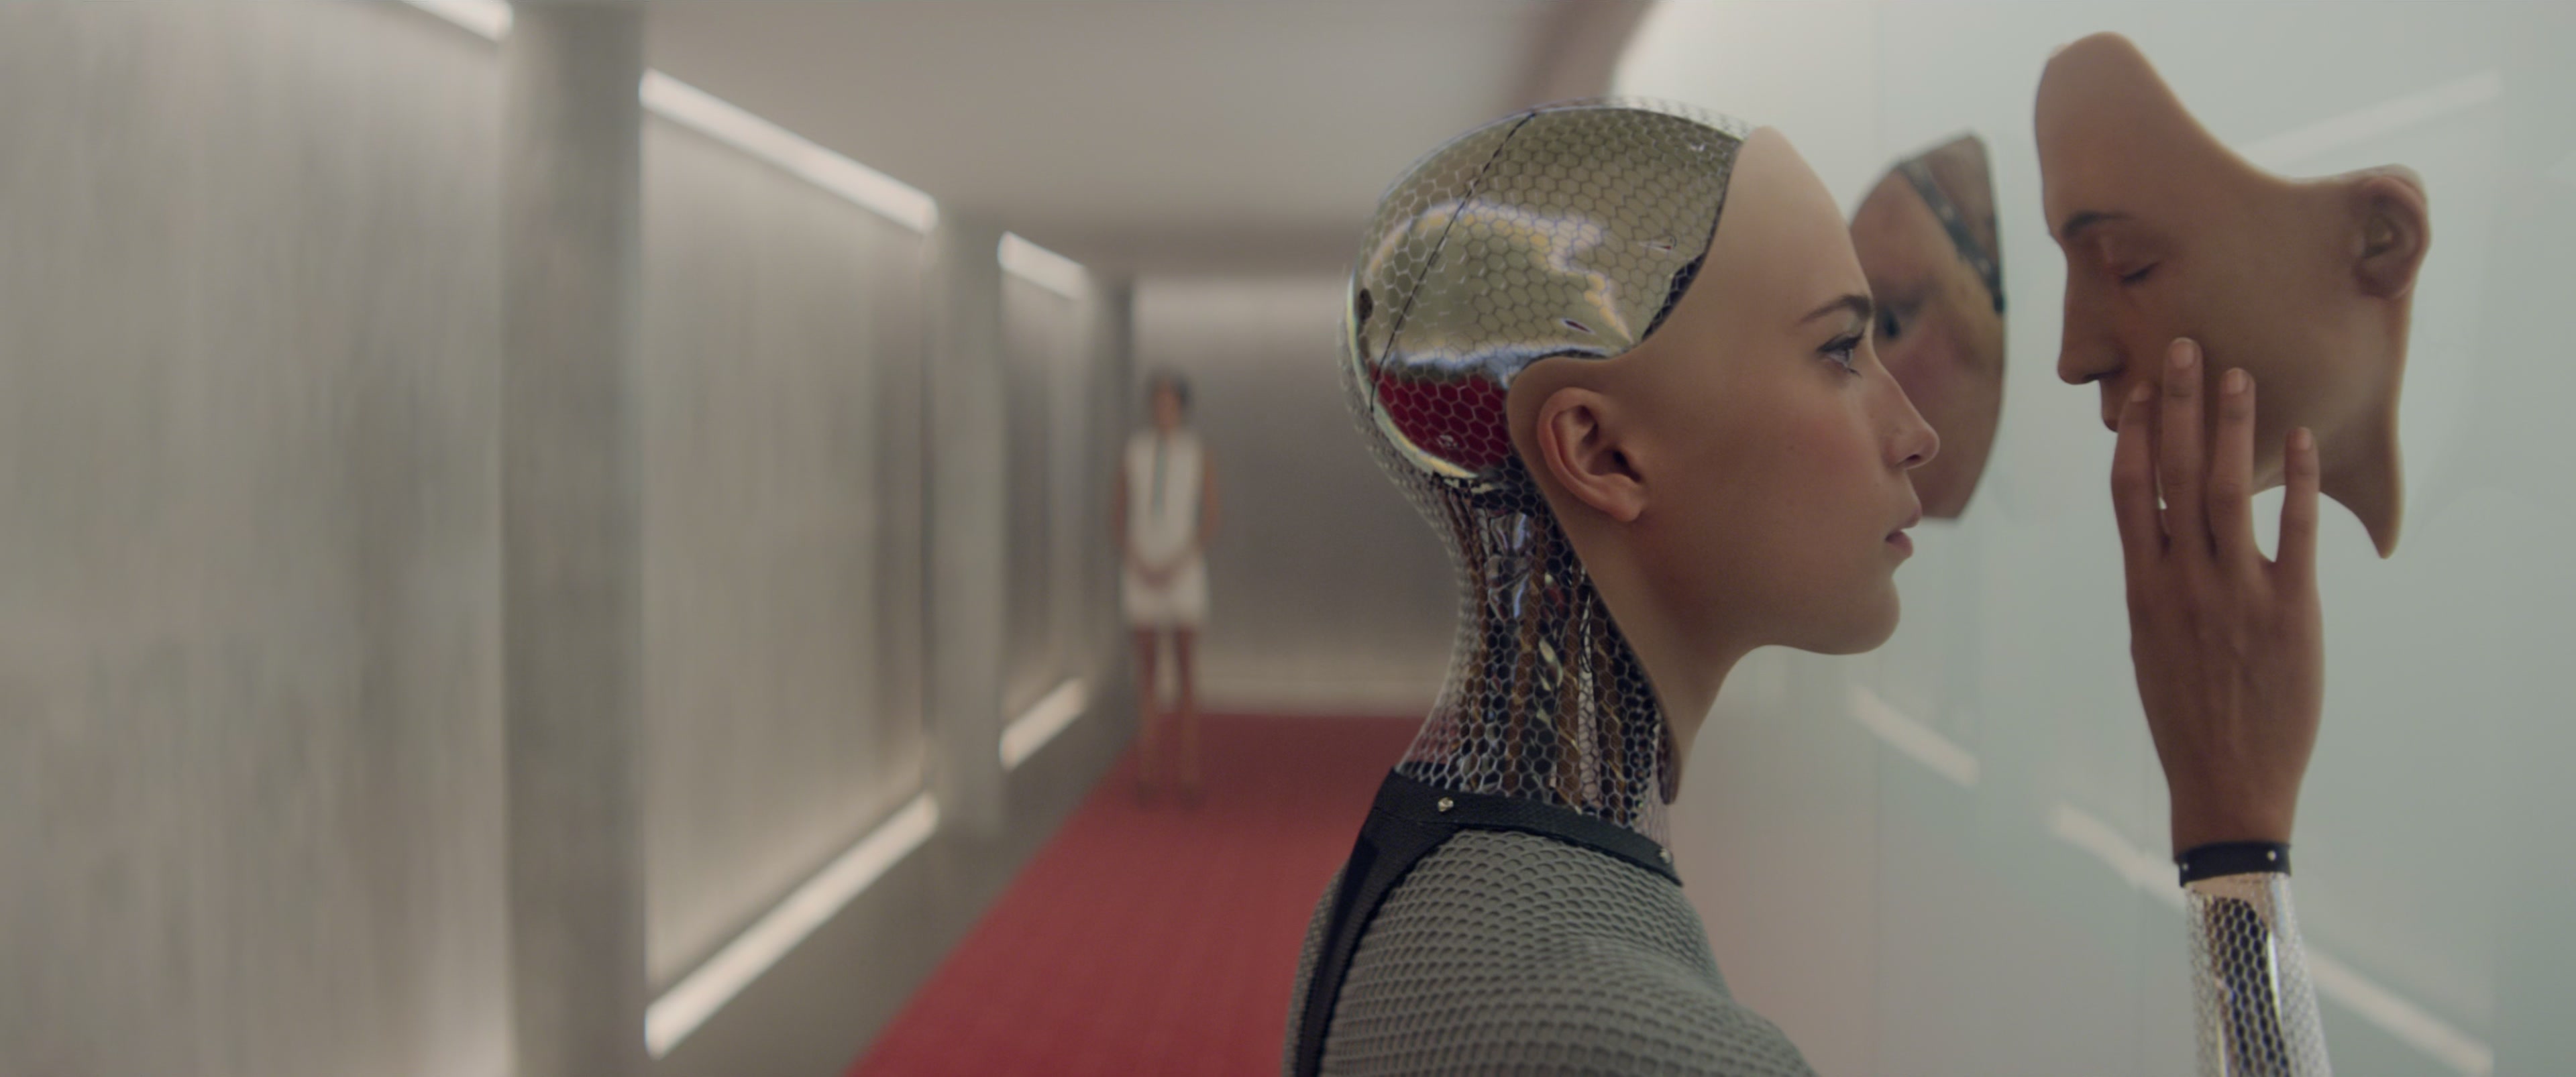 An android woman touching an artificial face hanging from a wall with a woman in a white dress standing at the far end of a futuristic looking hallway with faded red carpeting.